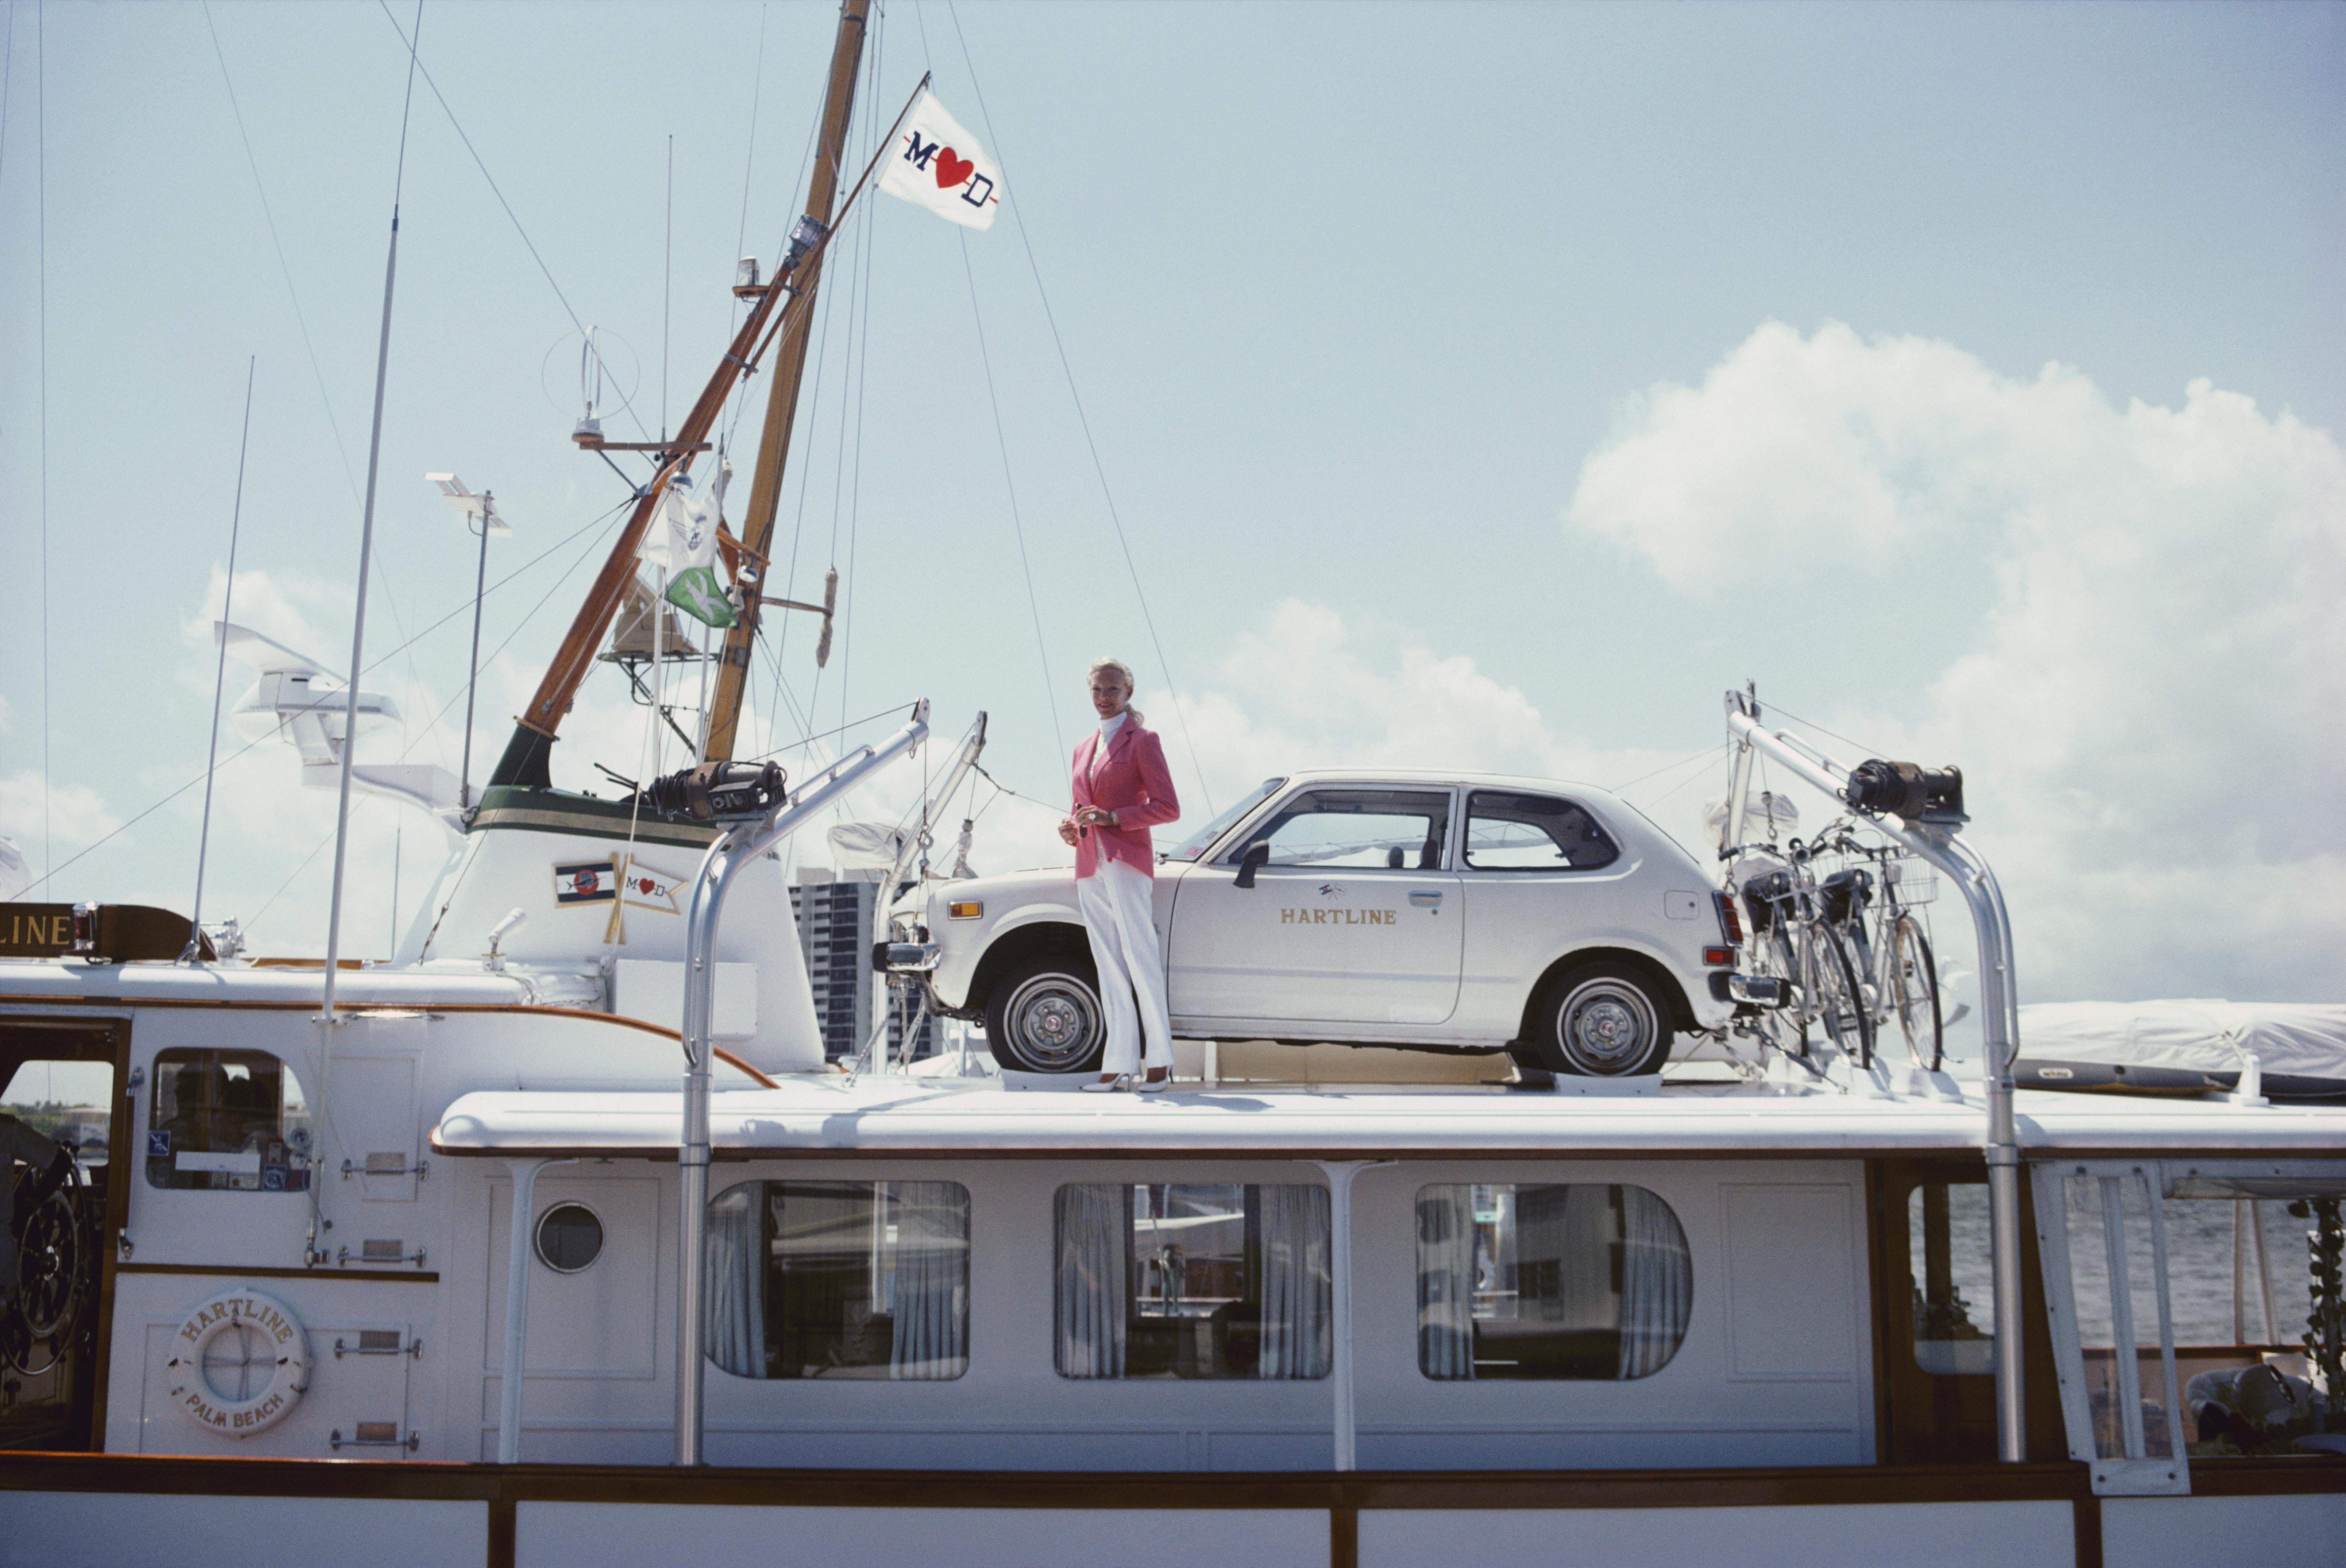 'No Transport Problems' 1980 Slim Aarons Limited Estate Edition

Mrs Woolworth Donahue with car and bicycles on her motor yacht, ‘Hartline’. 

Produced from the original transparency
Certificate of authenticity supplied 
30x40 inches / 76 x 102 cm